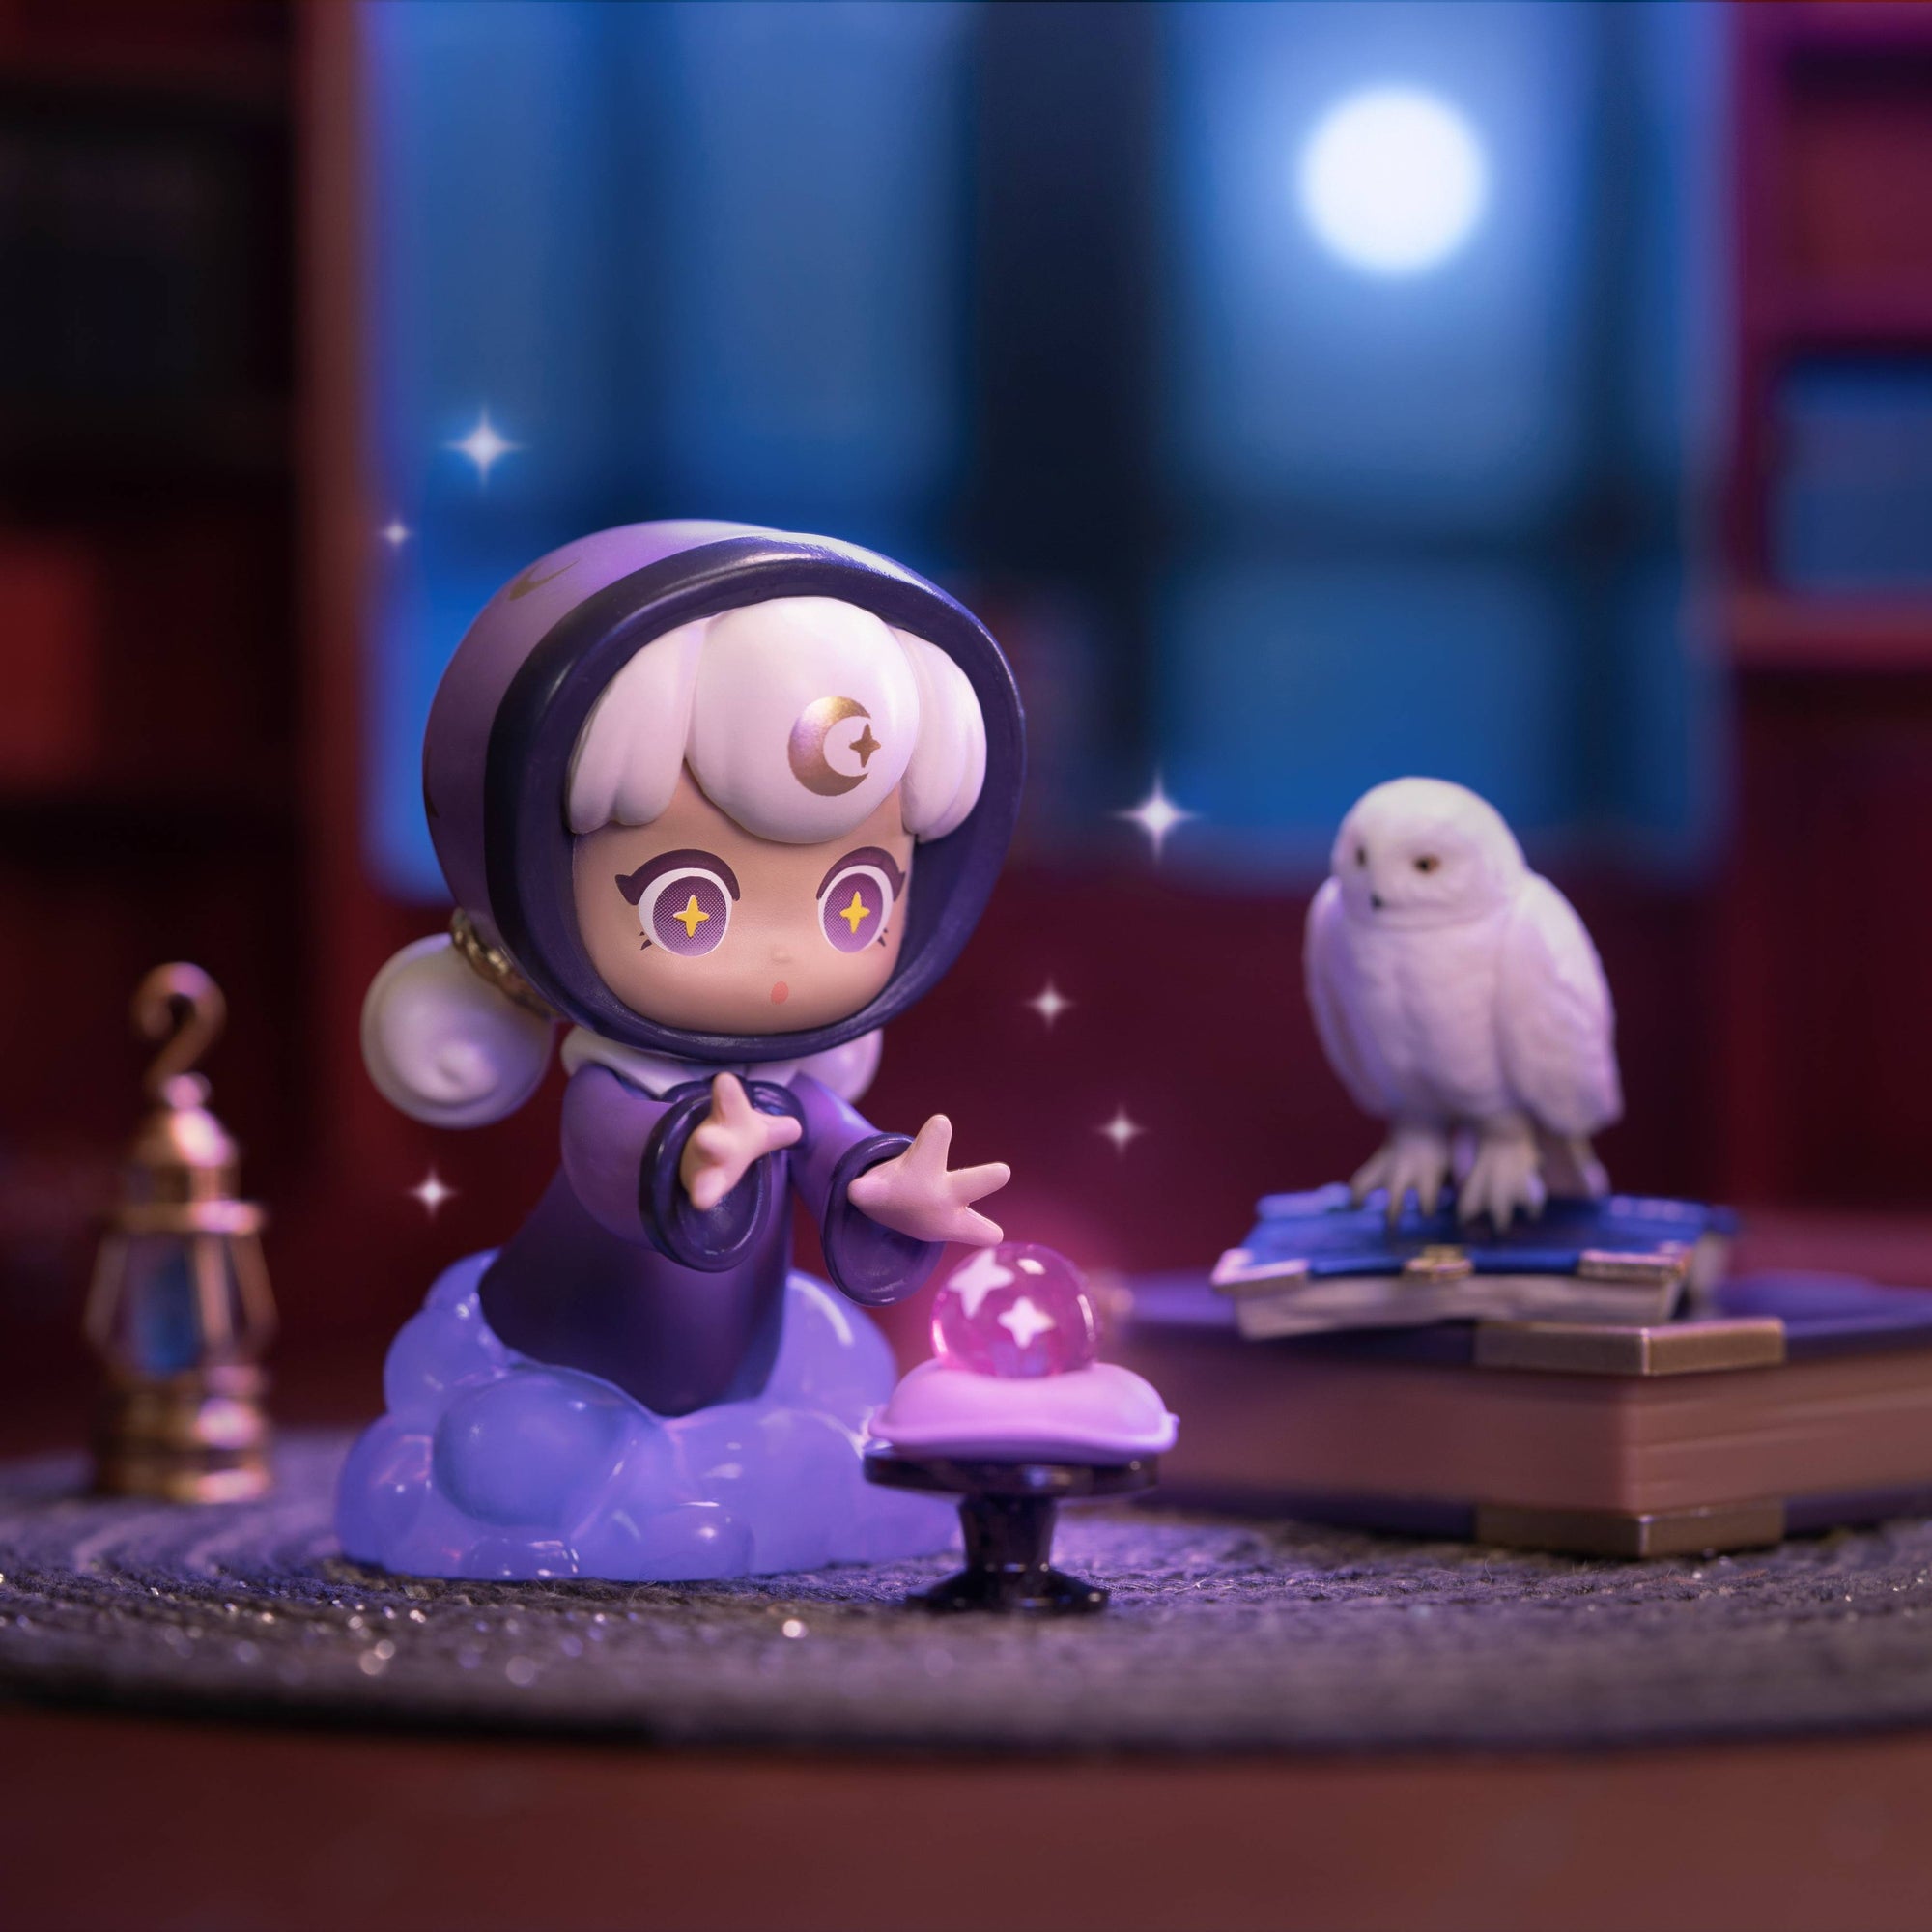 Vera Magic Lessons Blind Box Series by TOP TOY